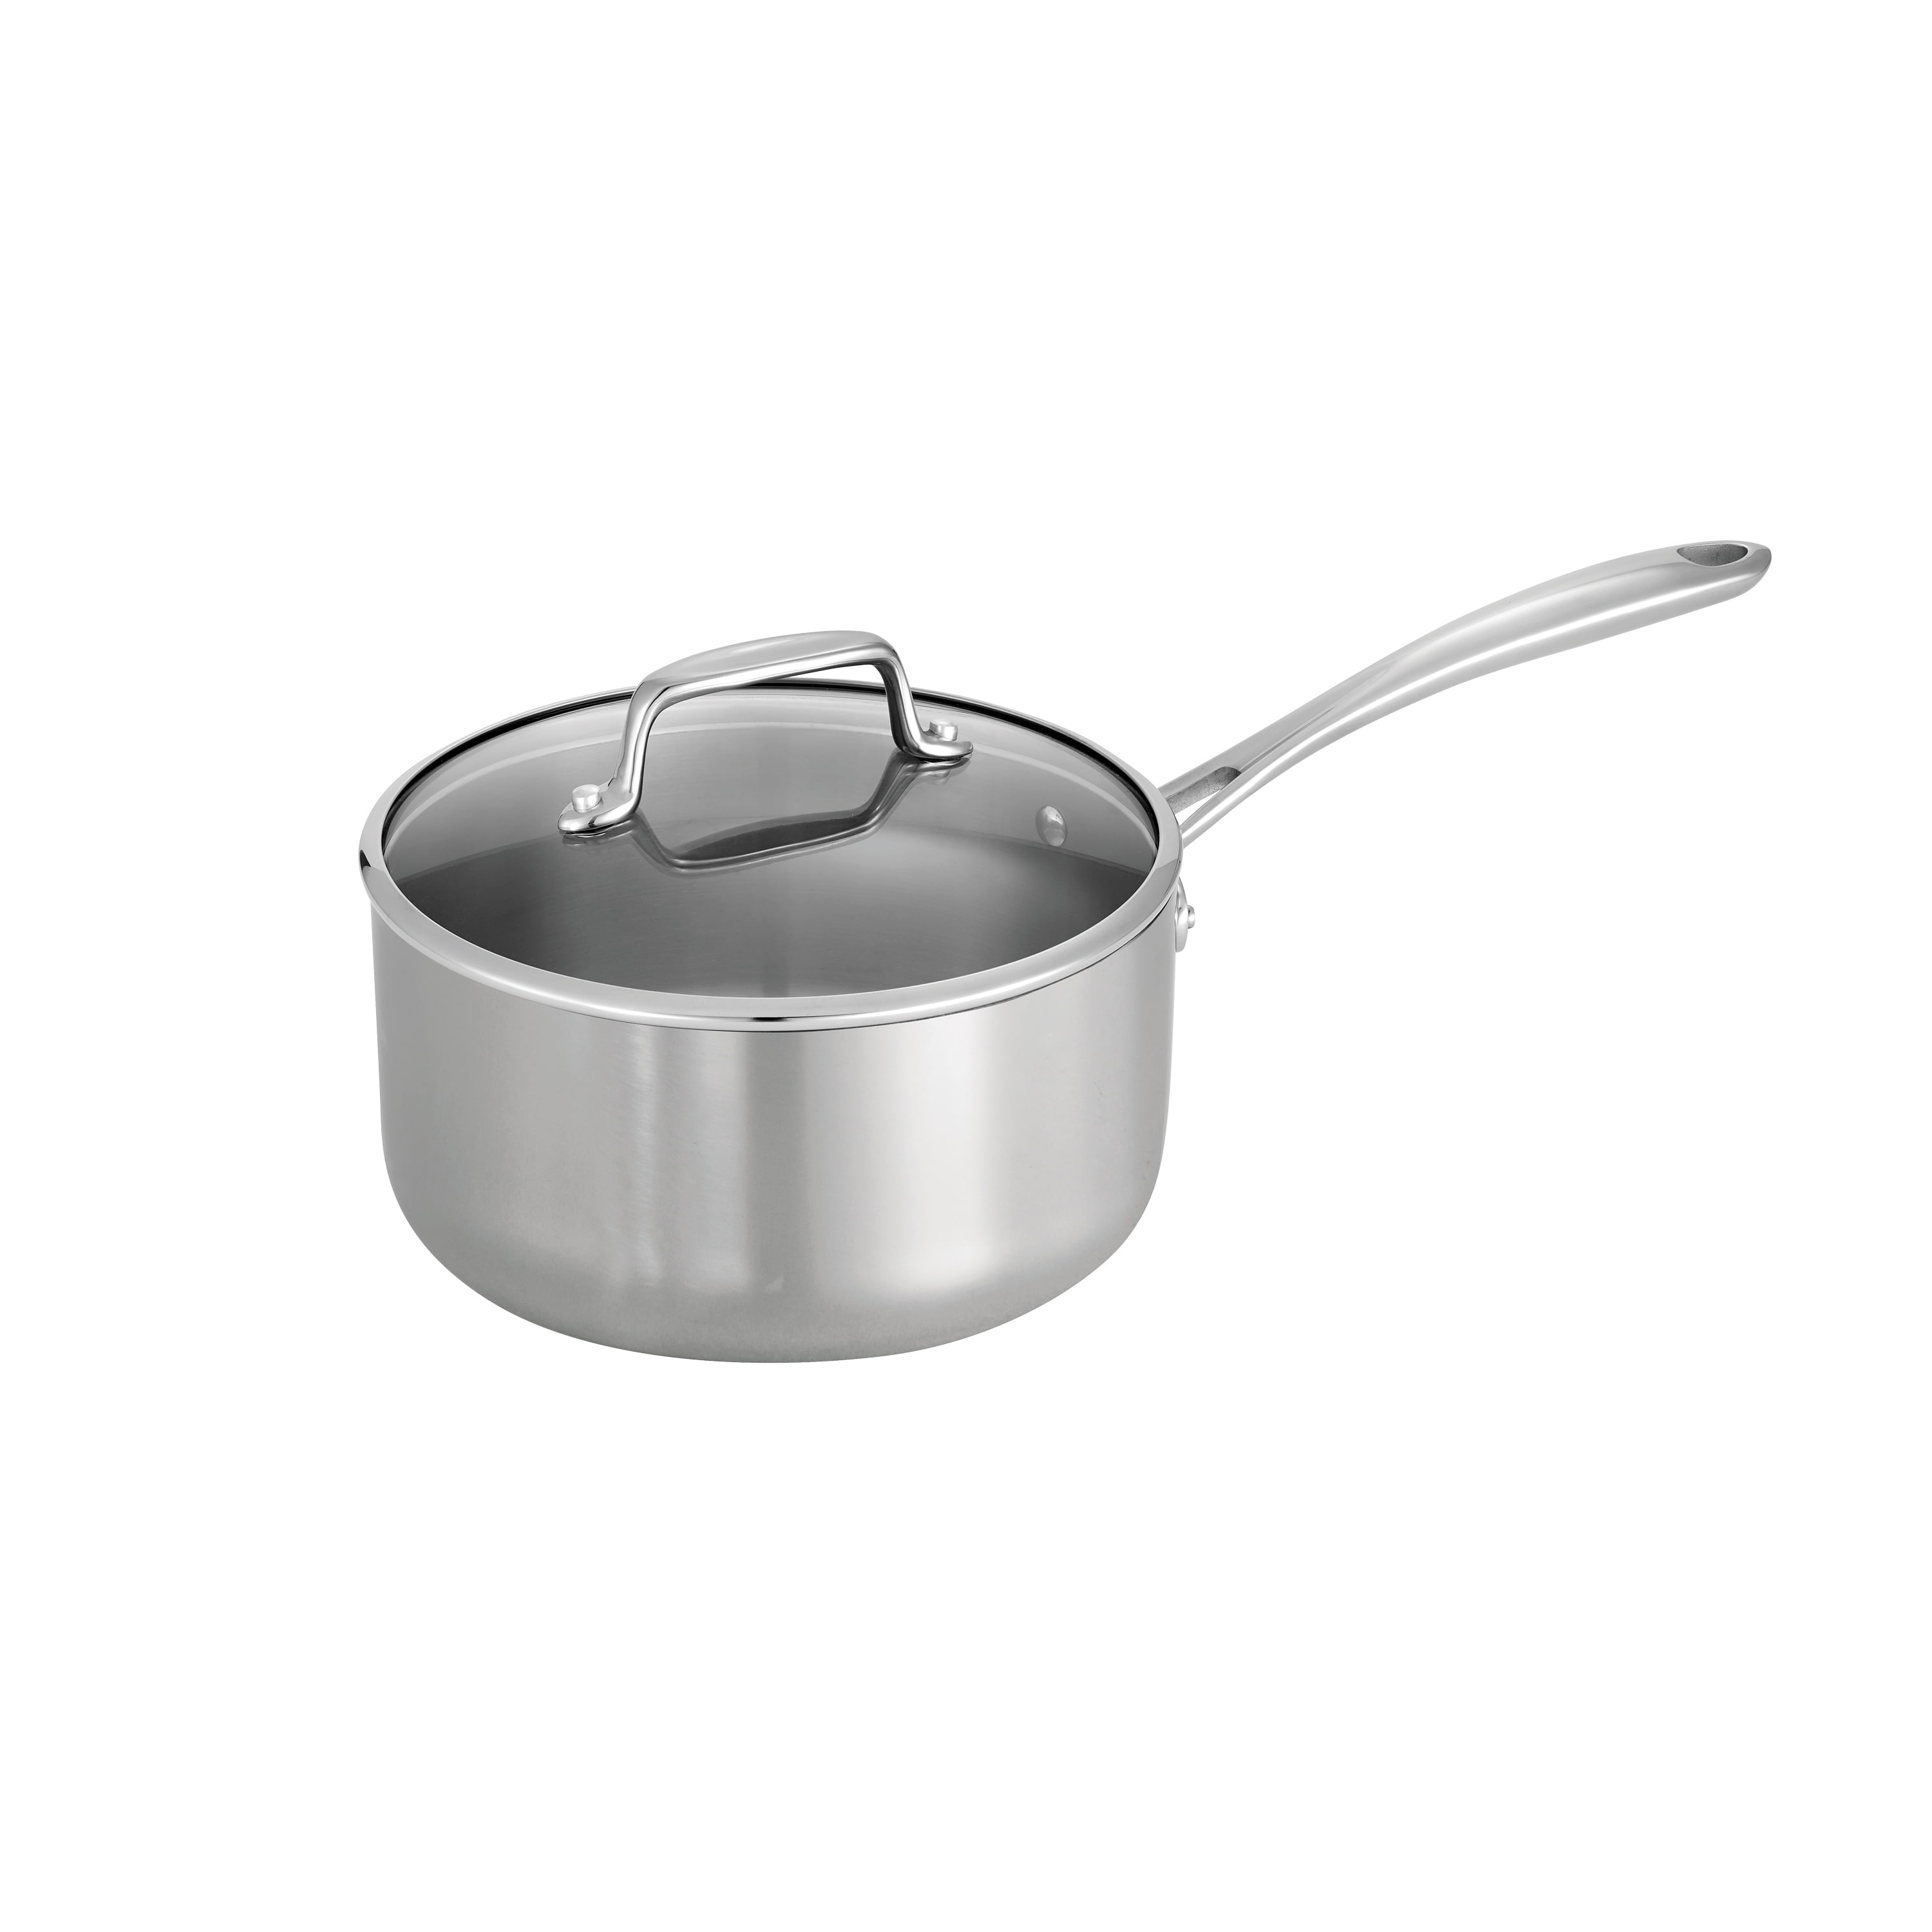 All-Clad Tri-Ply Stainless Steel 2 quart Sauce Pan for sale online 